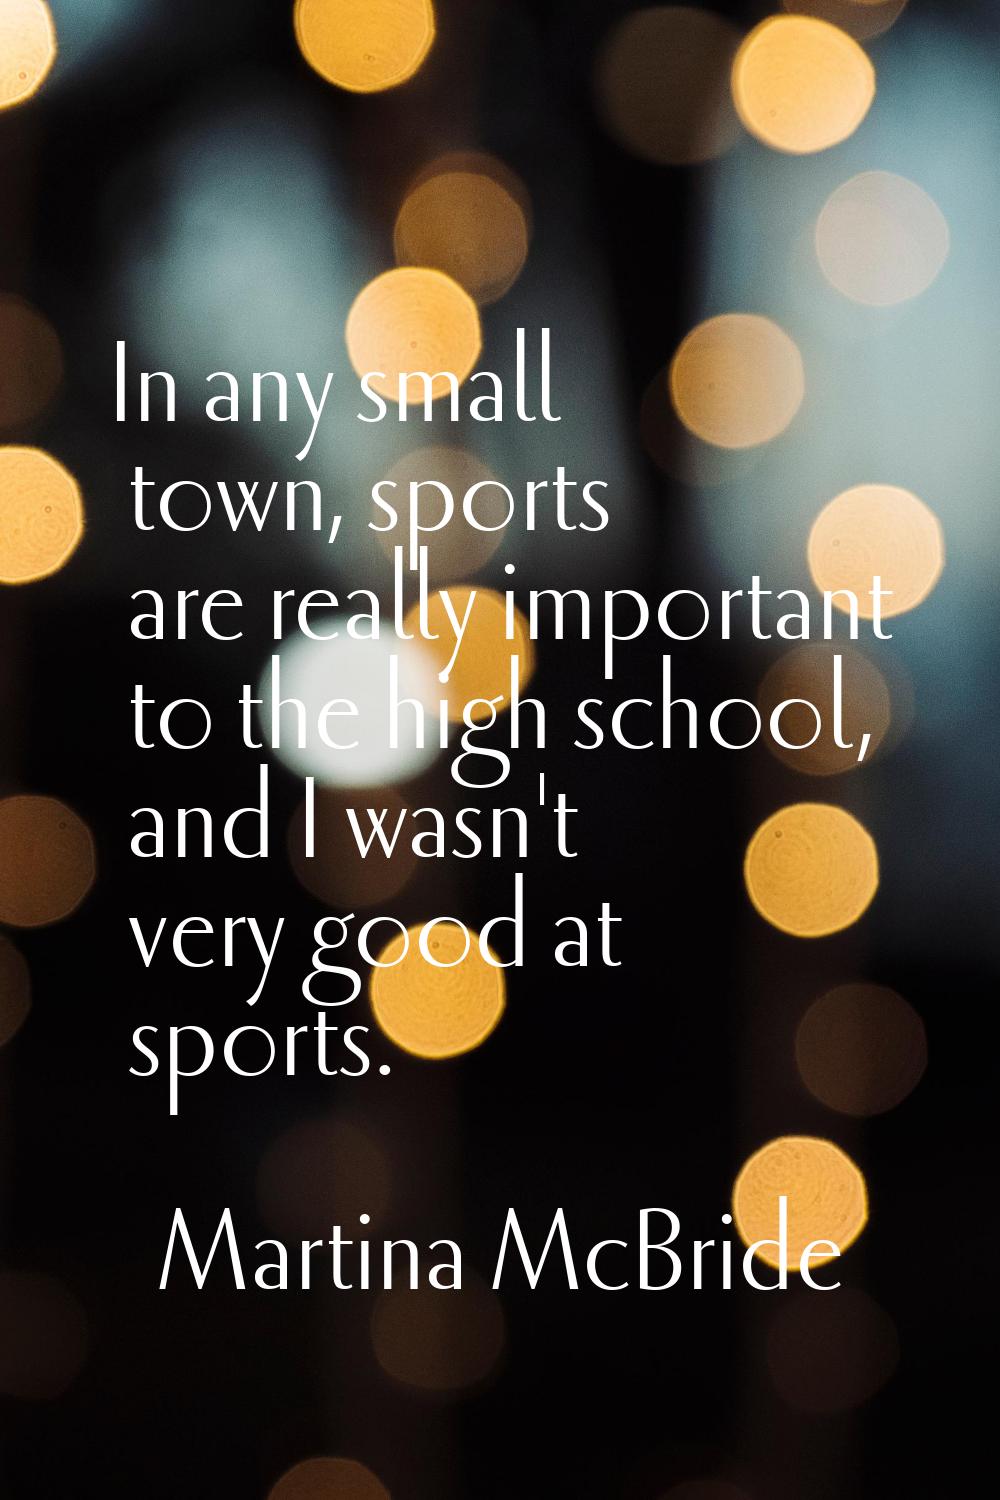 In any small town, sports are really important to the high school, and I wasn't very good at sports